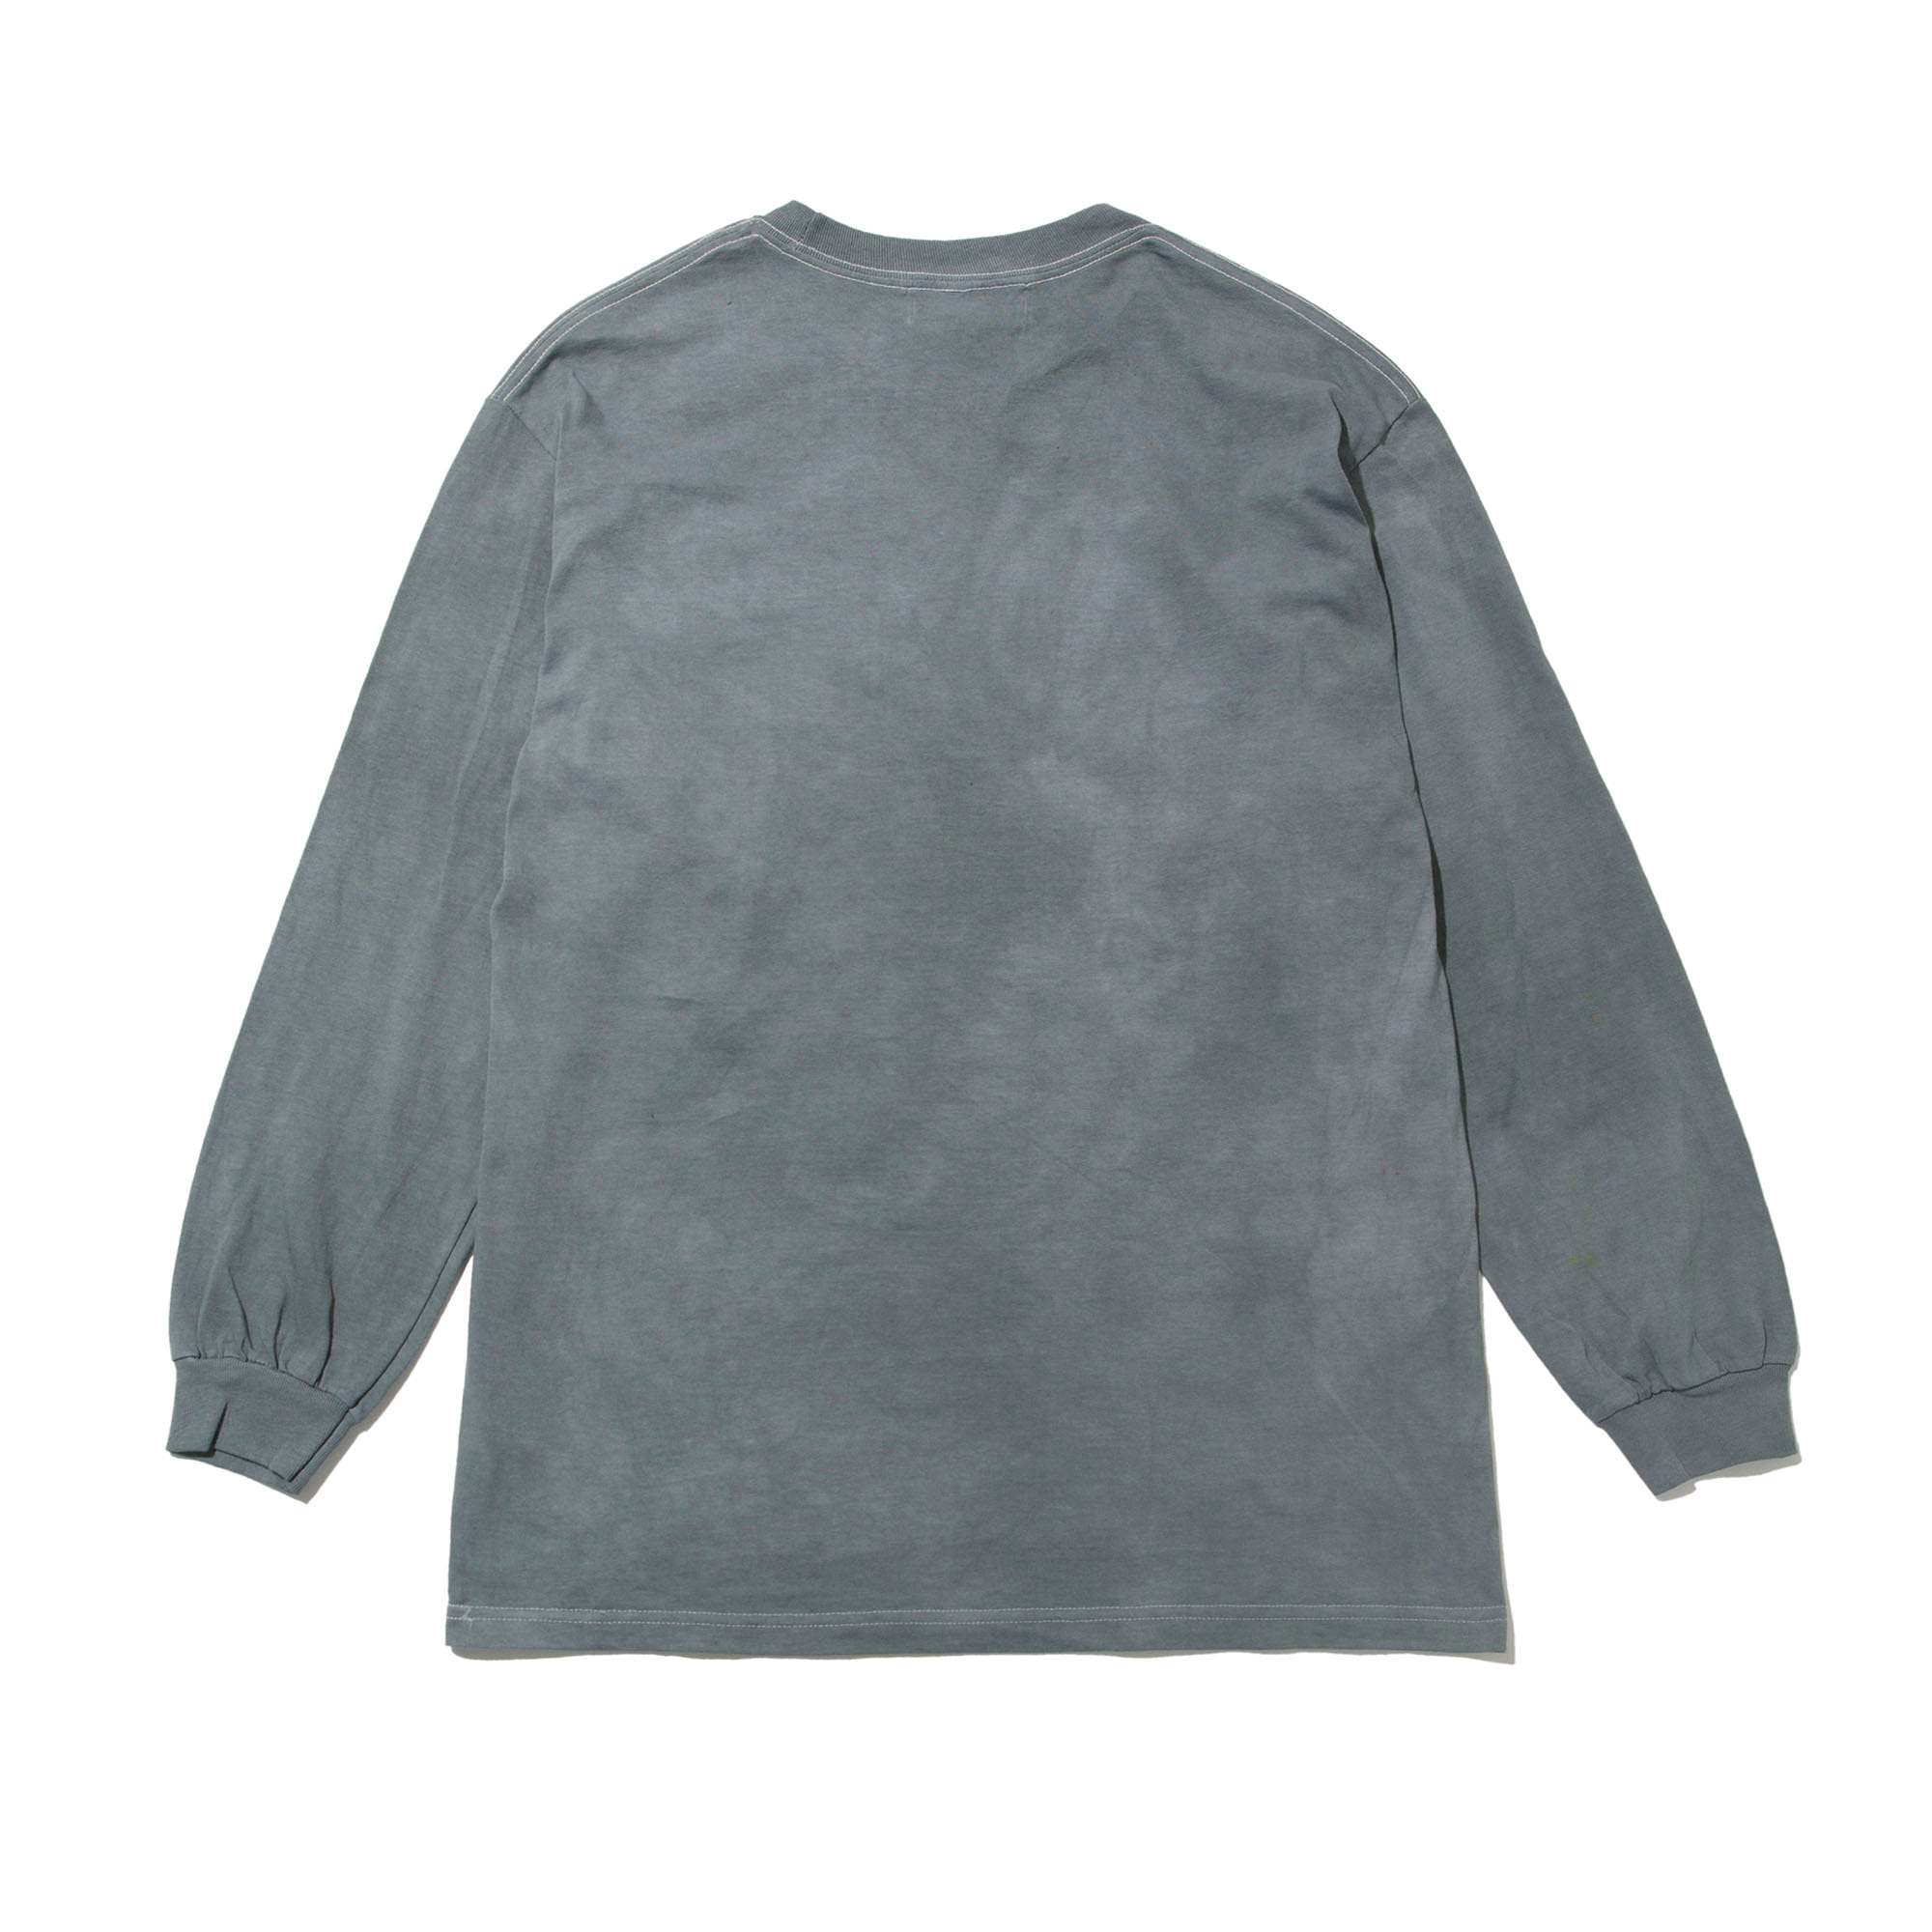 CL OVERDYED LS TEE - CHARCOAL